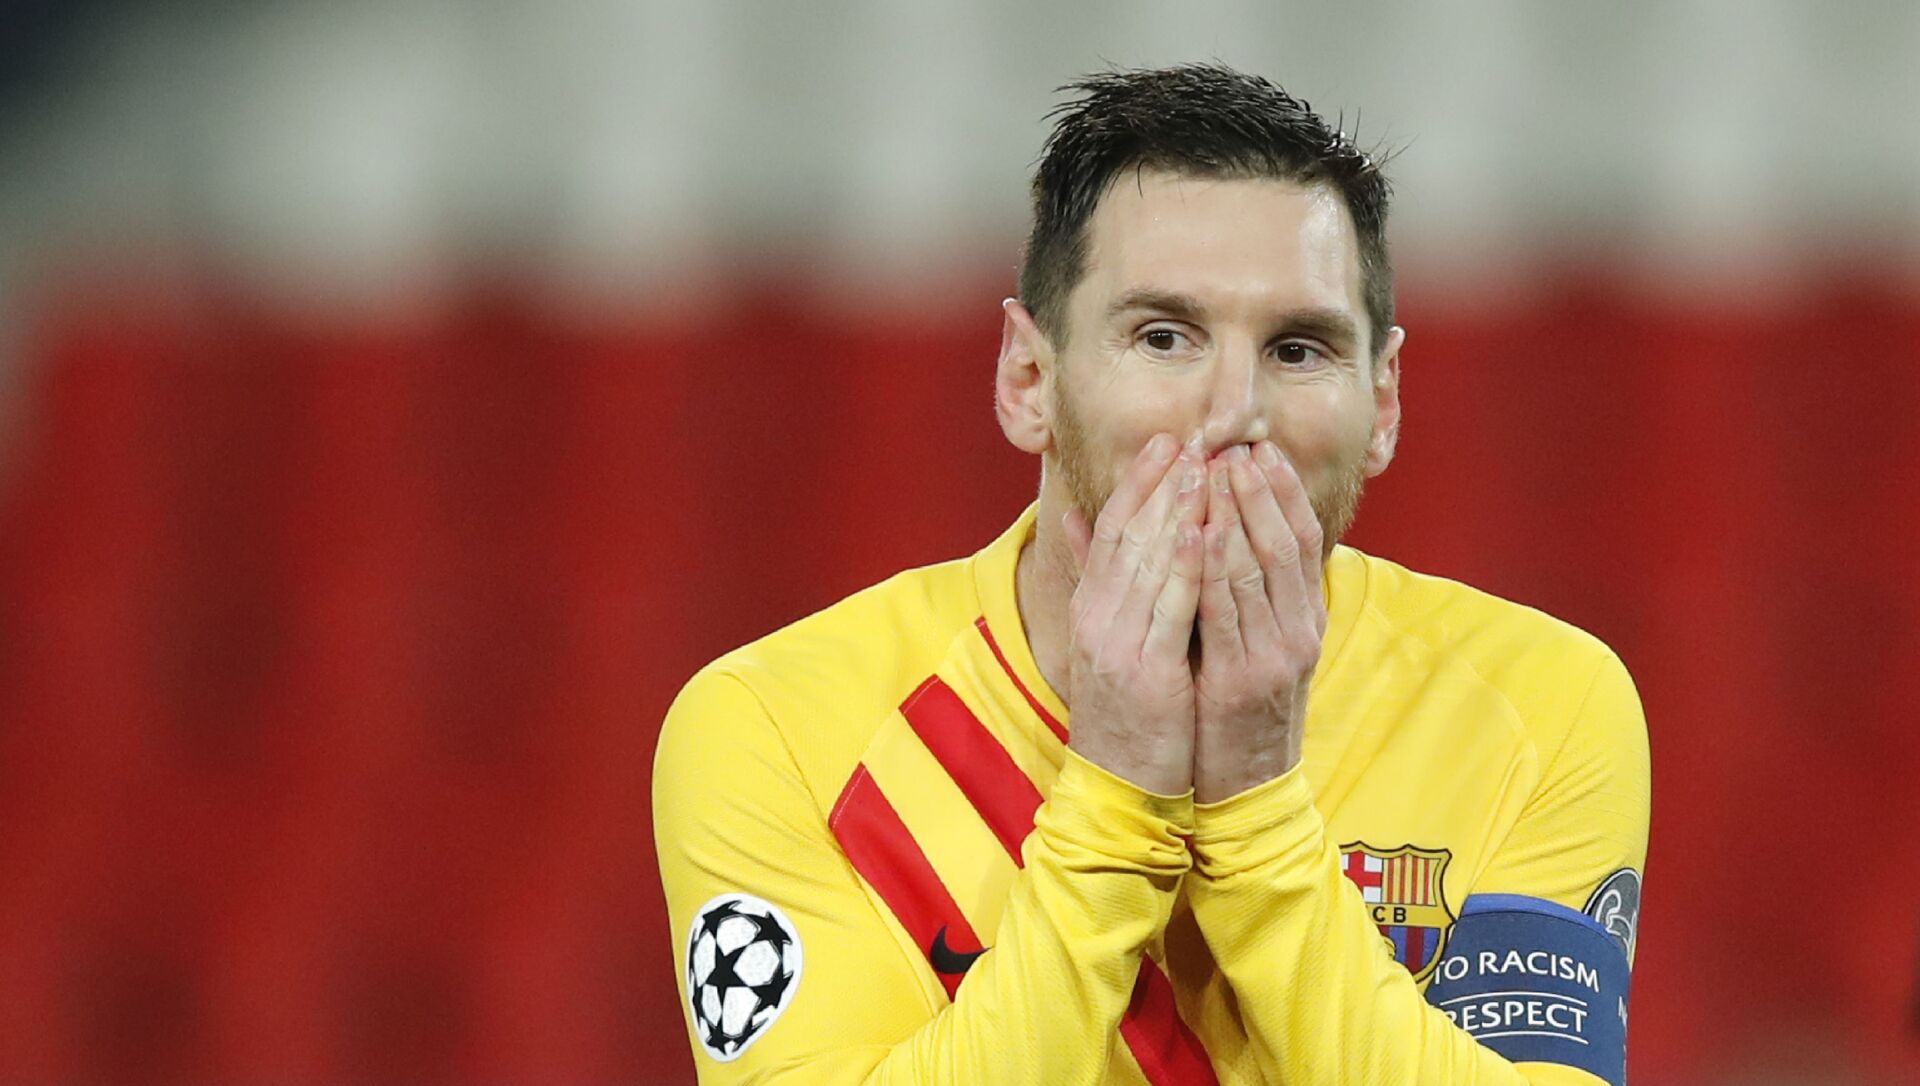 Barcelona's Lionel Messi reacts after a missed a penalty shot during the Champions League, round of 16, second leg soccer match between Paris Saint-Germain and FC Barcelona at the Parc des Princes stadium in Paris on Wednesday, March 10, 2021 - اسپوتنیک افغانستان  , 1920, 12.05.2021